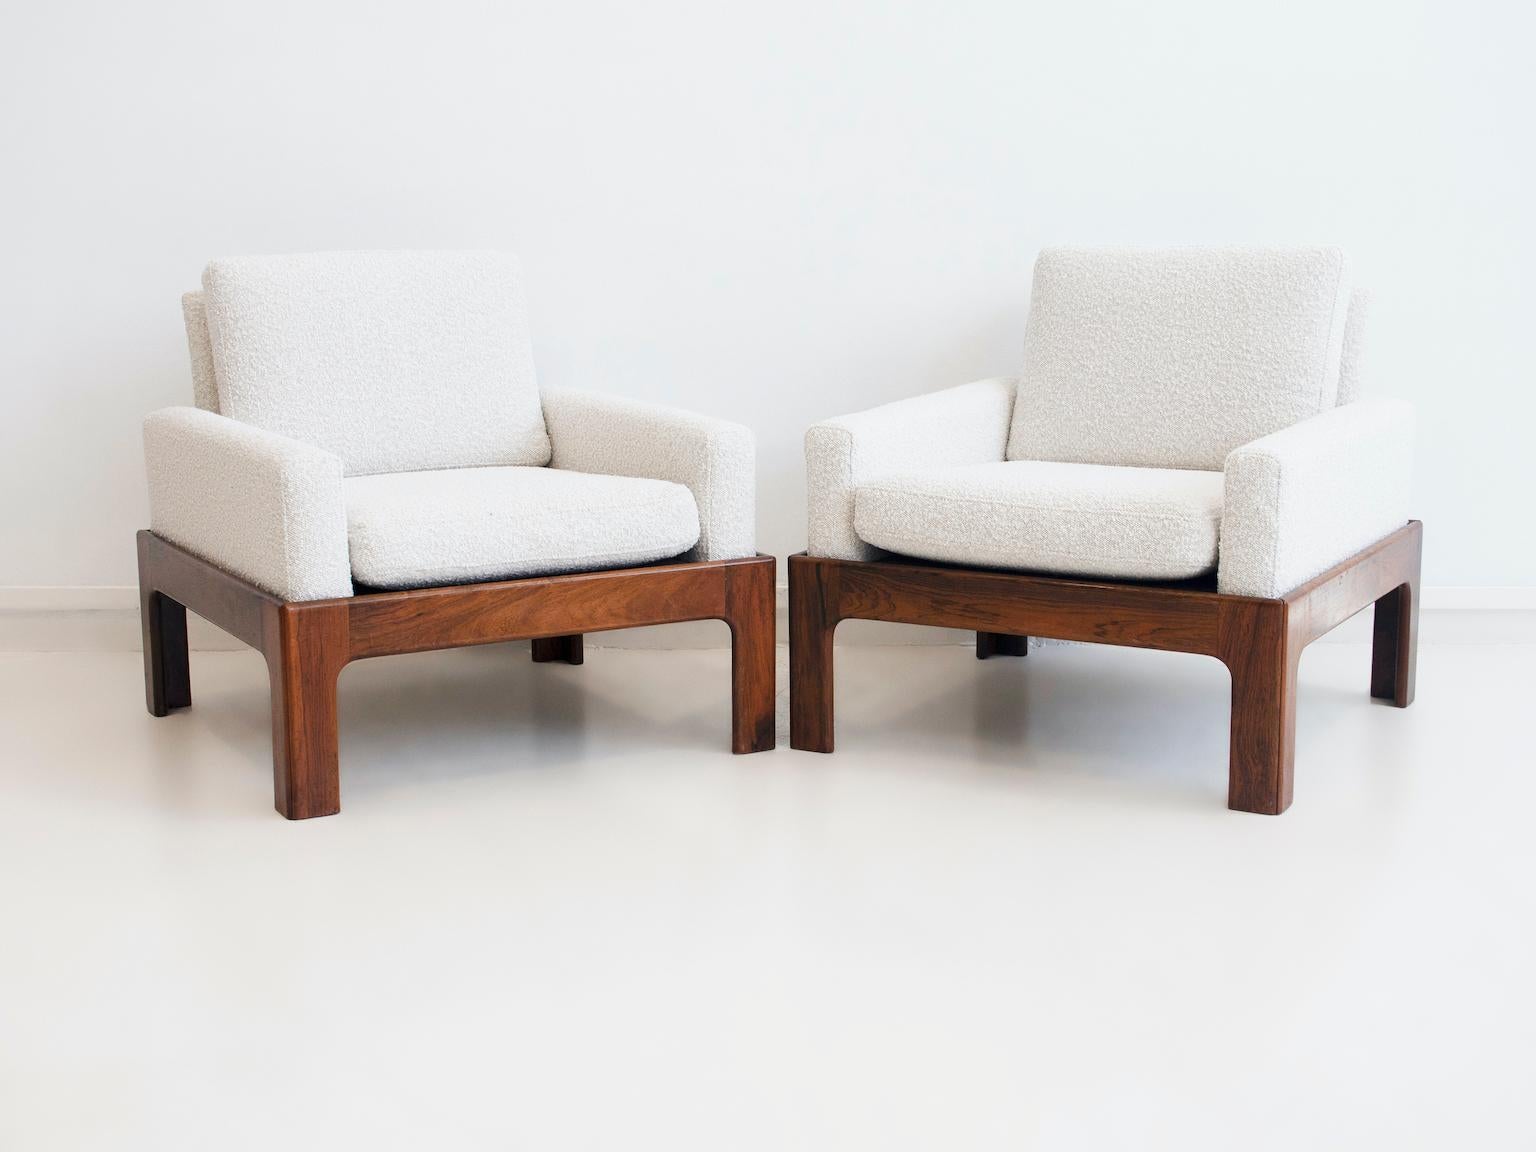 Danish Pair of Hardwood Armchairs with Bouclé Fabric Upholstery by Eilersen